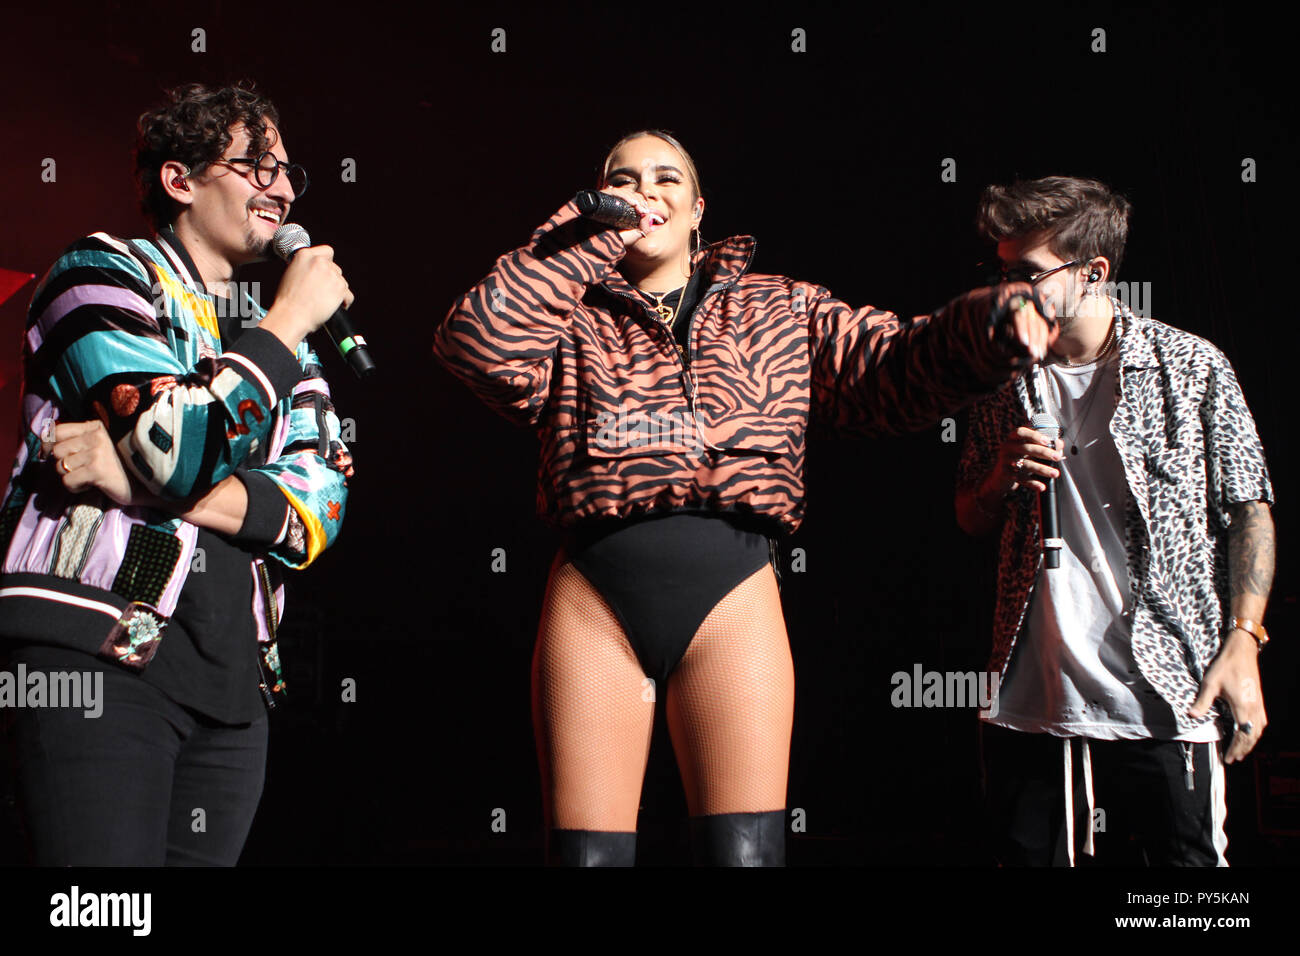 MIAMI, FL - OCTOBER 24: Mau y Ricky and Karol G perform at the Karol G and Reykon concert at the Fillmore Miami in Miami, Florida on October 24, 2018. Credit: Majo Grossi/MediaPunch Stock Photo